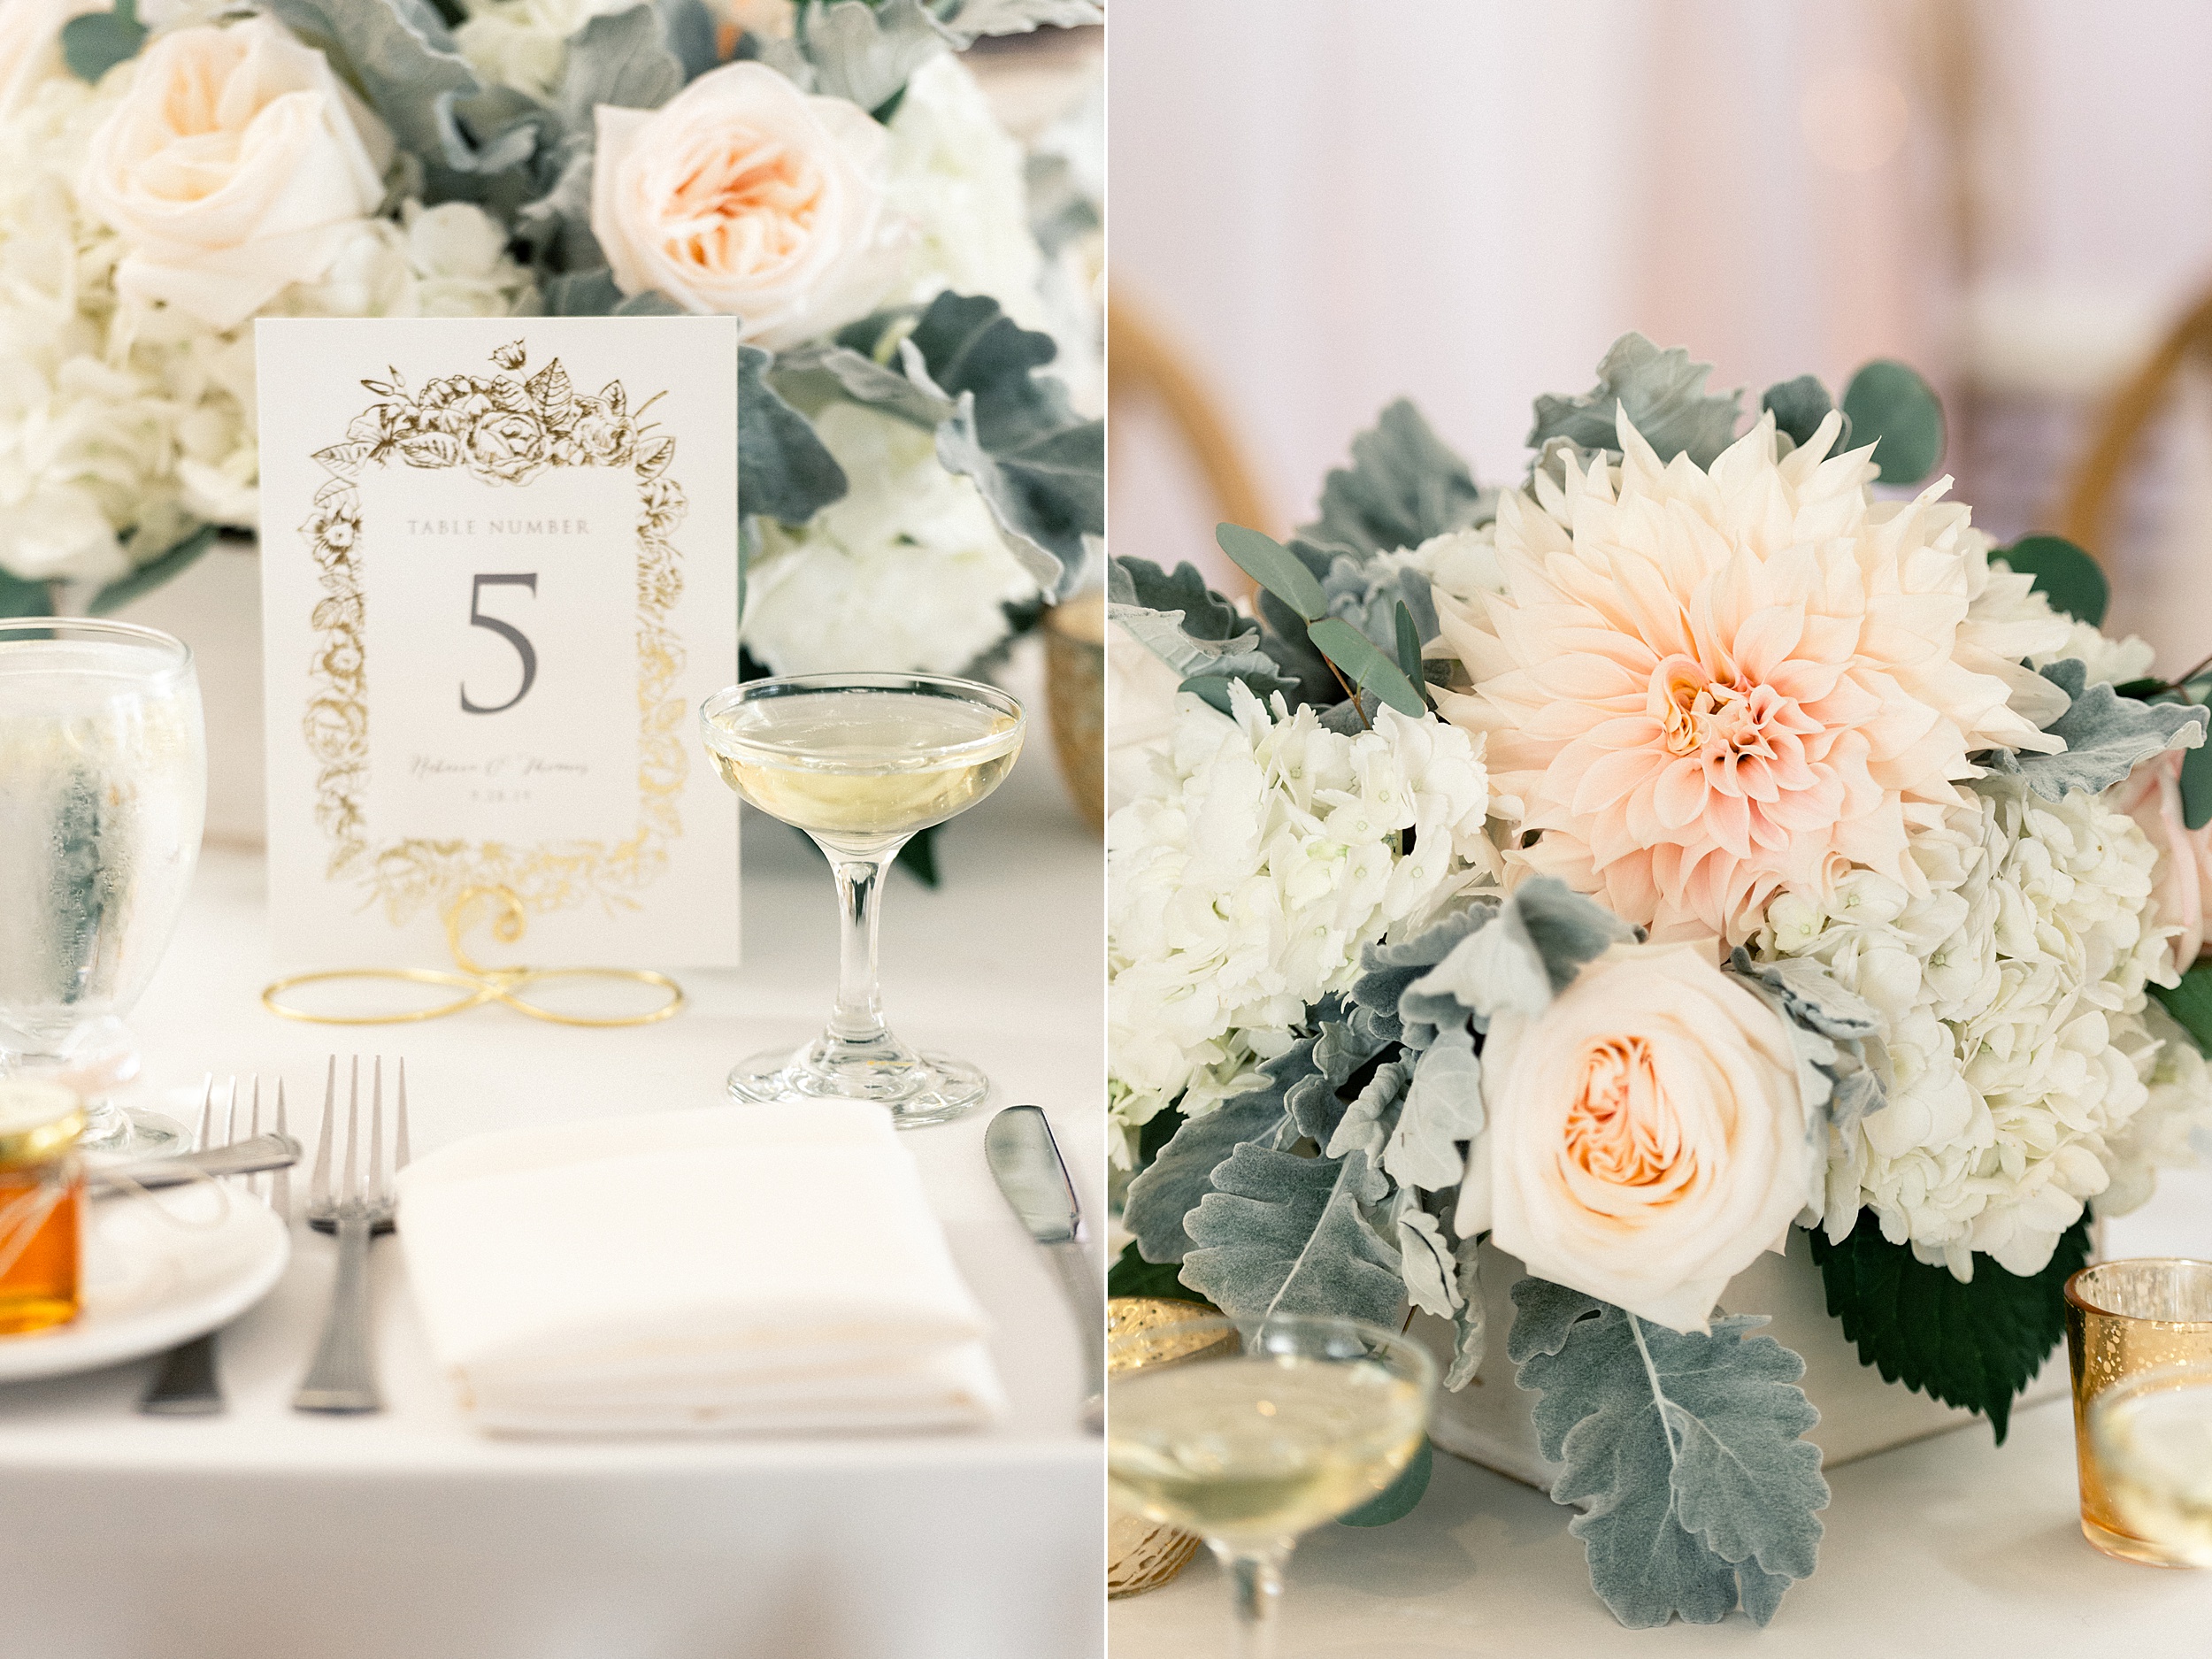 blush and peach hues in white wooden boxes and gold foil table numbers for york harbor inn wedding reception centerpieces